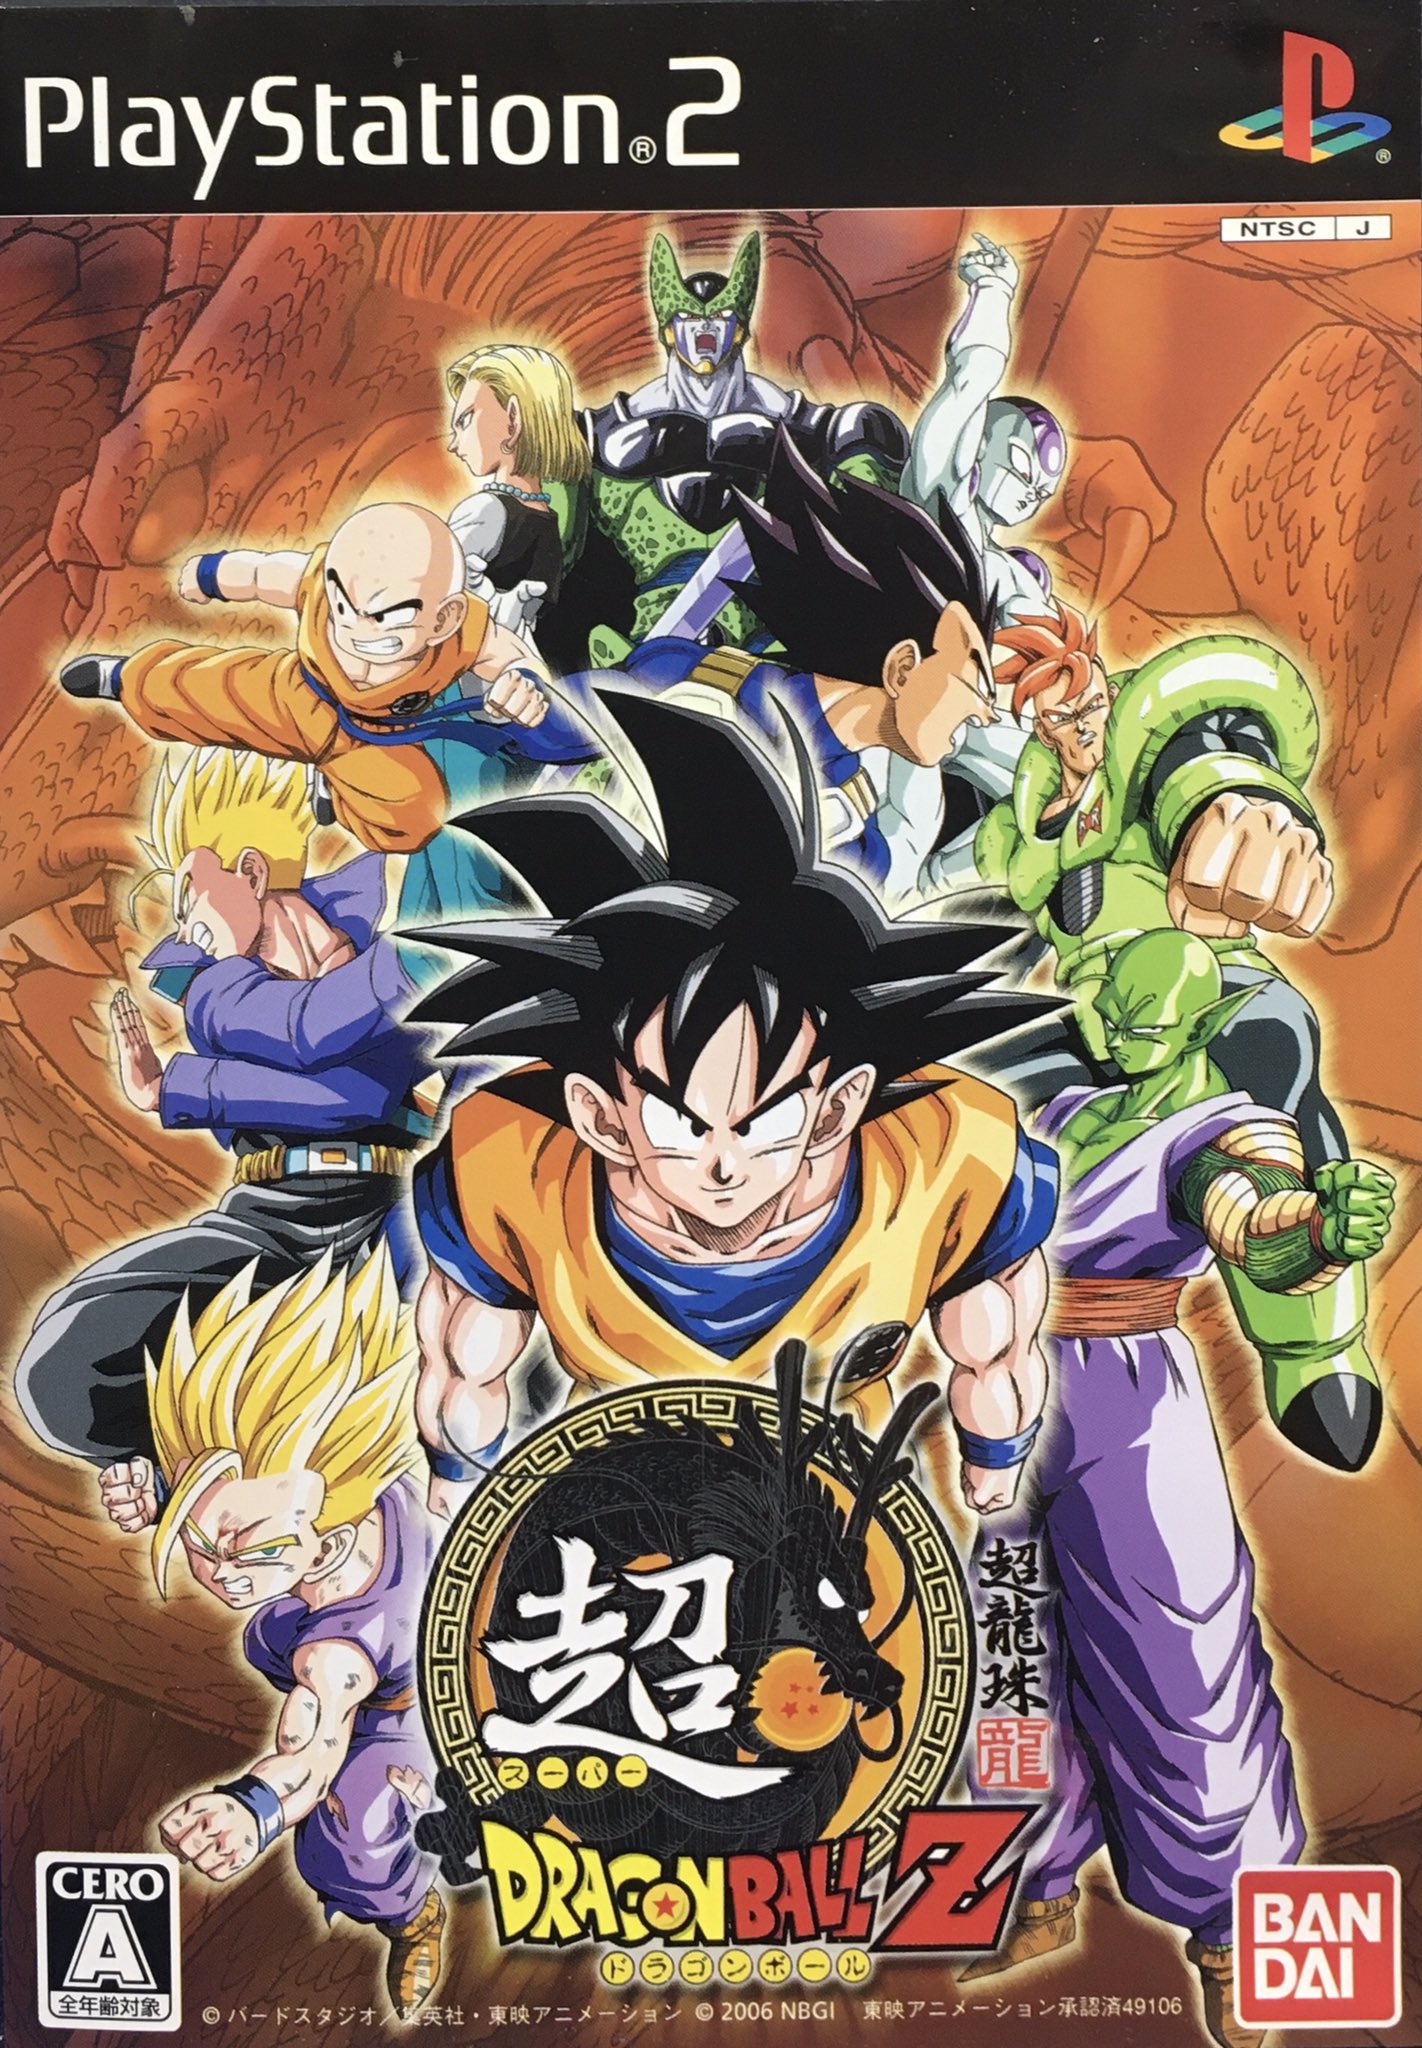 Super Dragon Ball Z — StrategyWiki, the video game walkthrough and strategy guide wiki